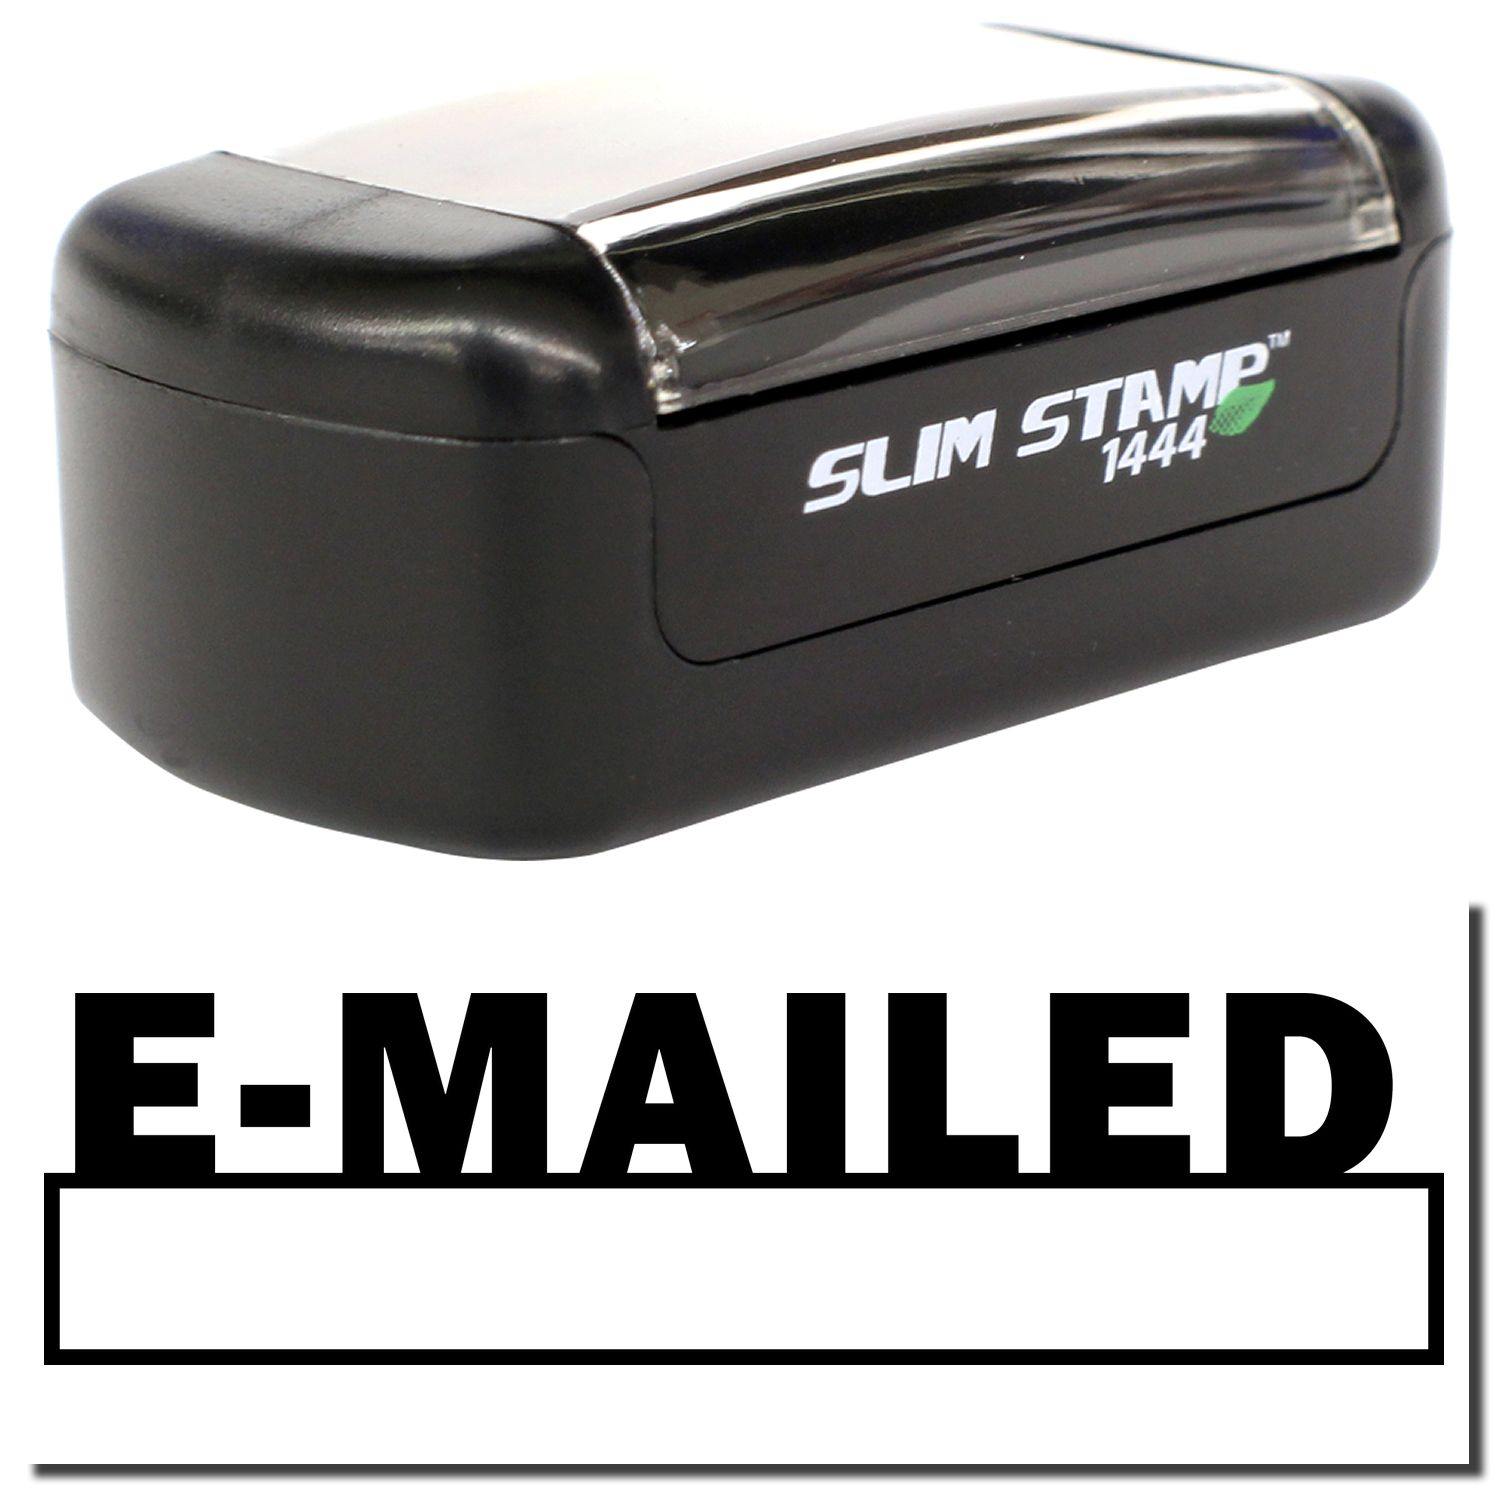 A stock office pre-inked stamp with a stamped image showing how the text "E-MAILED" with a date box underneath the text is displayed after stamping.